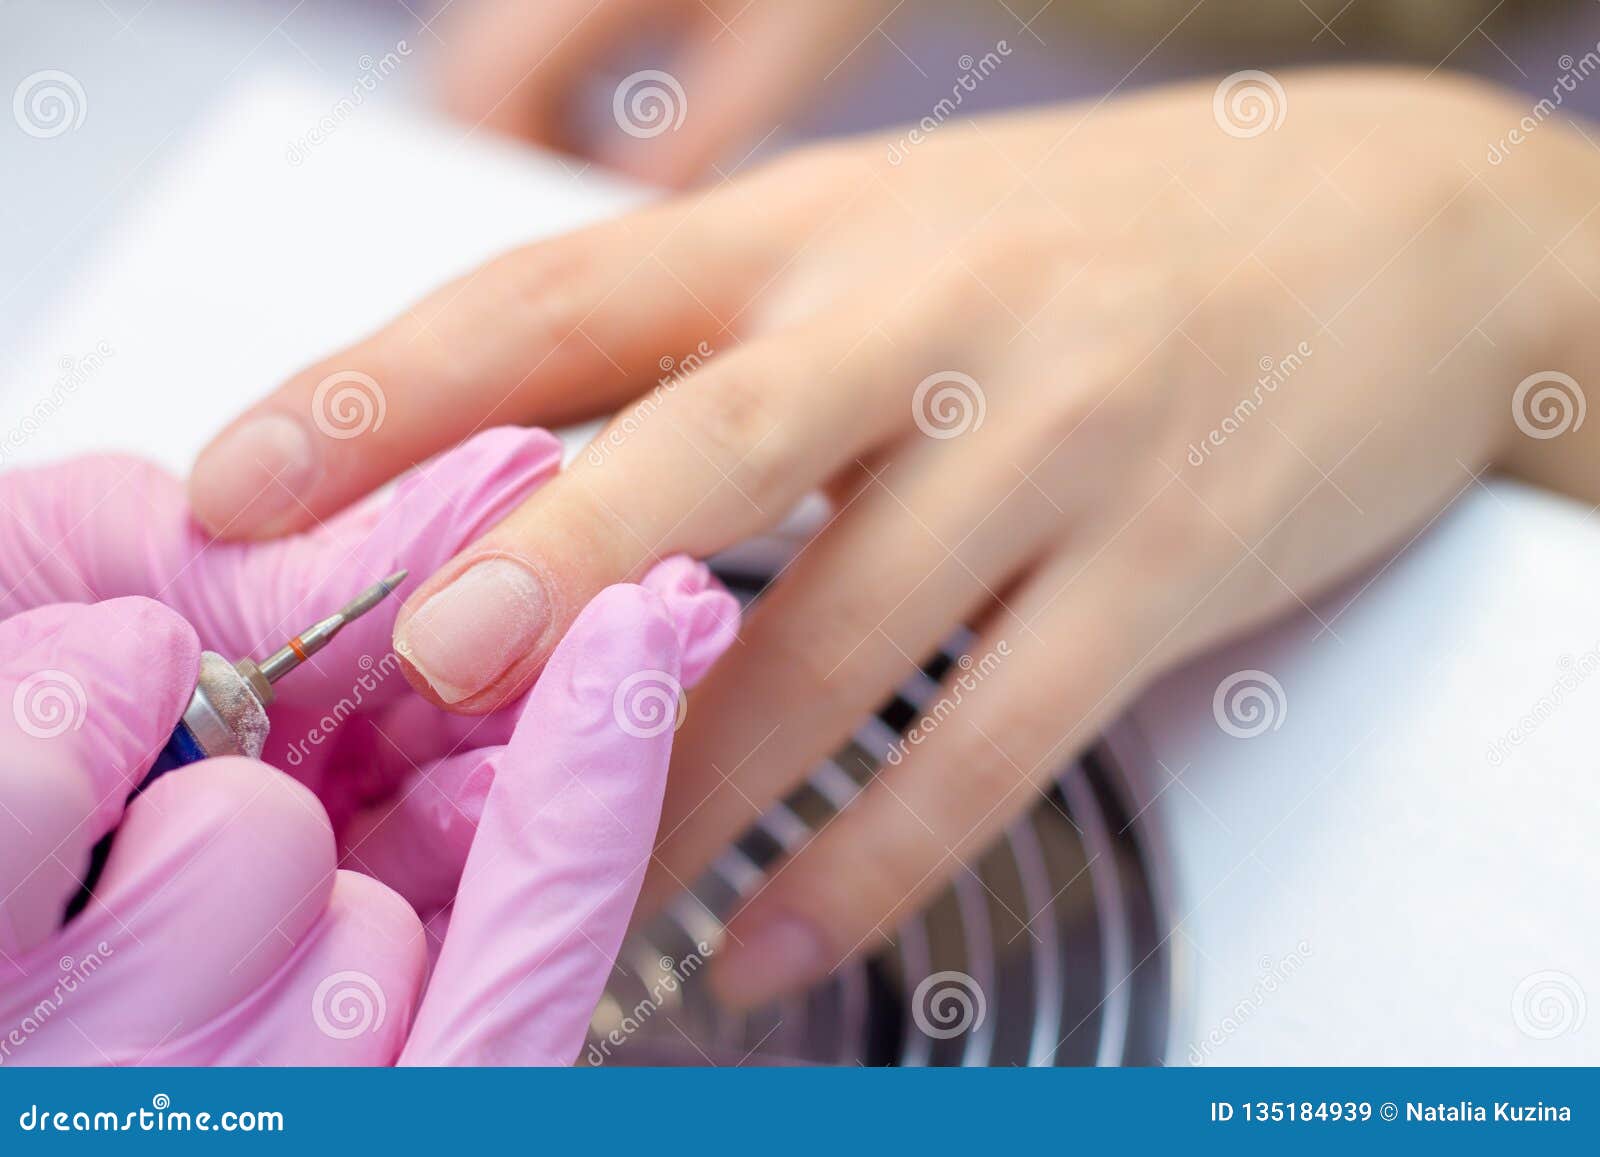 Hardware Manicure Using Electric Device Machine. Procedure for the  Preparation of Nails before Applying Nail Polish Stock Image - Image of  painting, care: 135184939